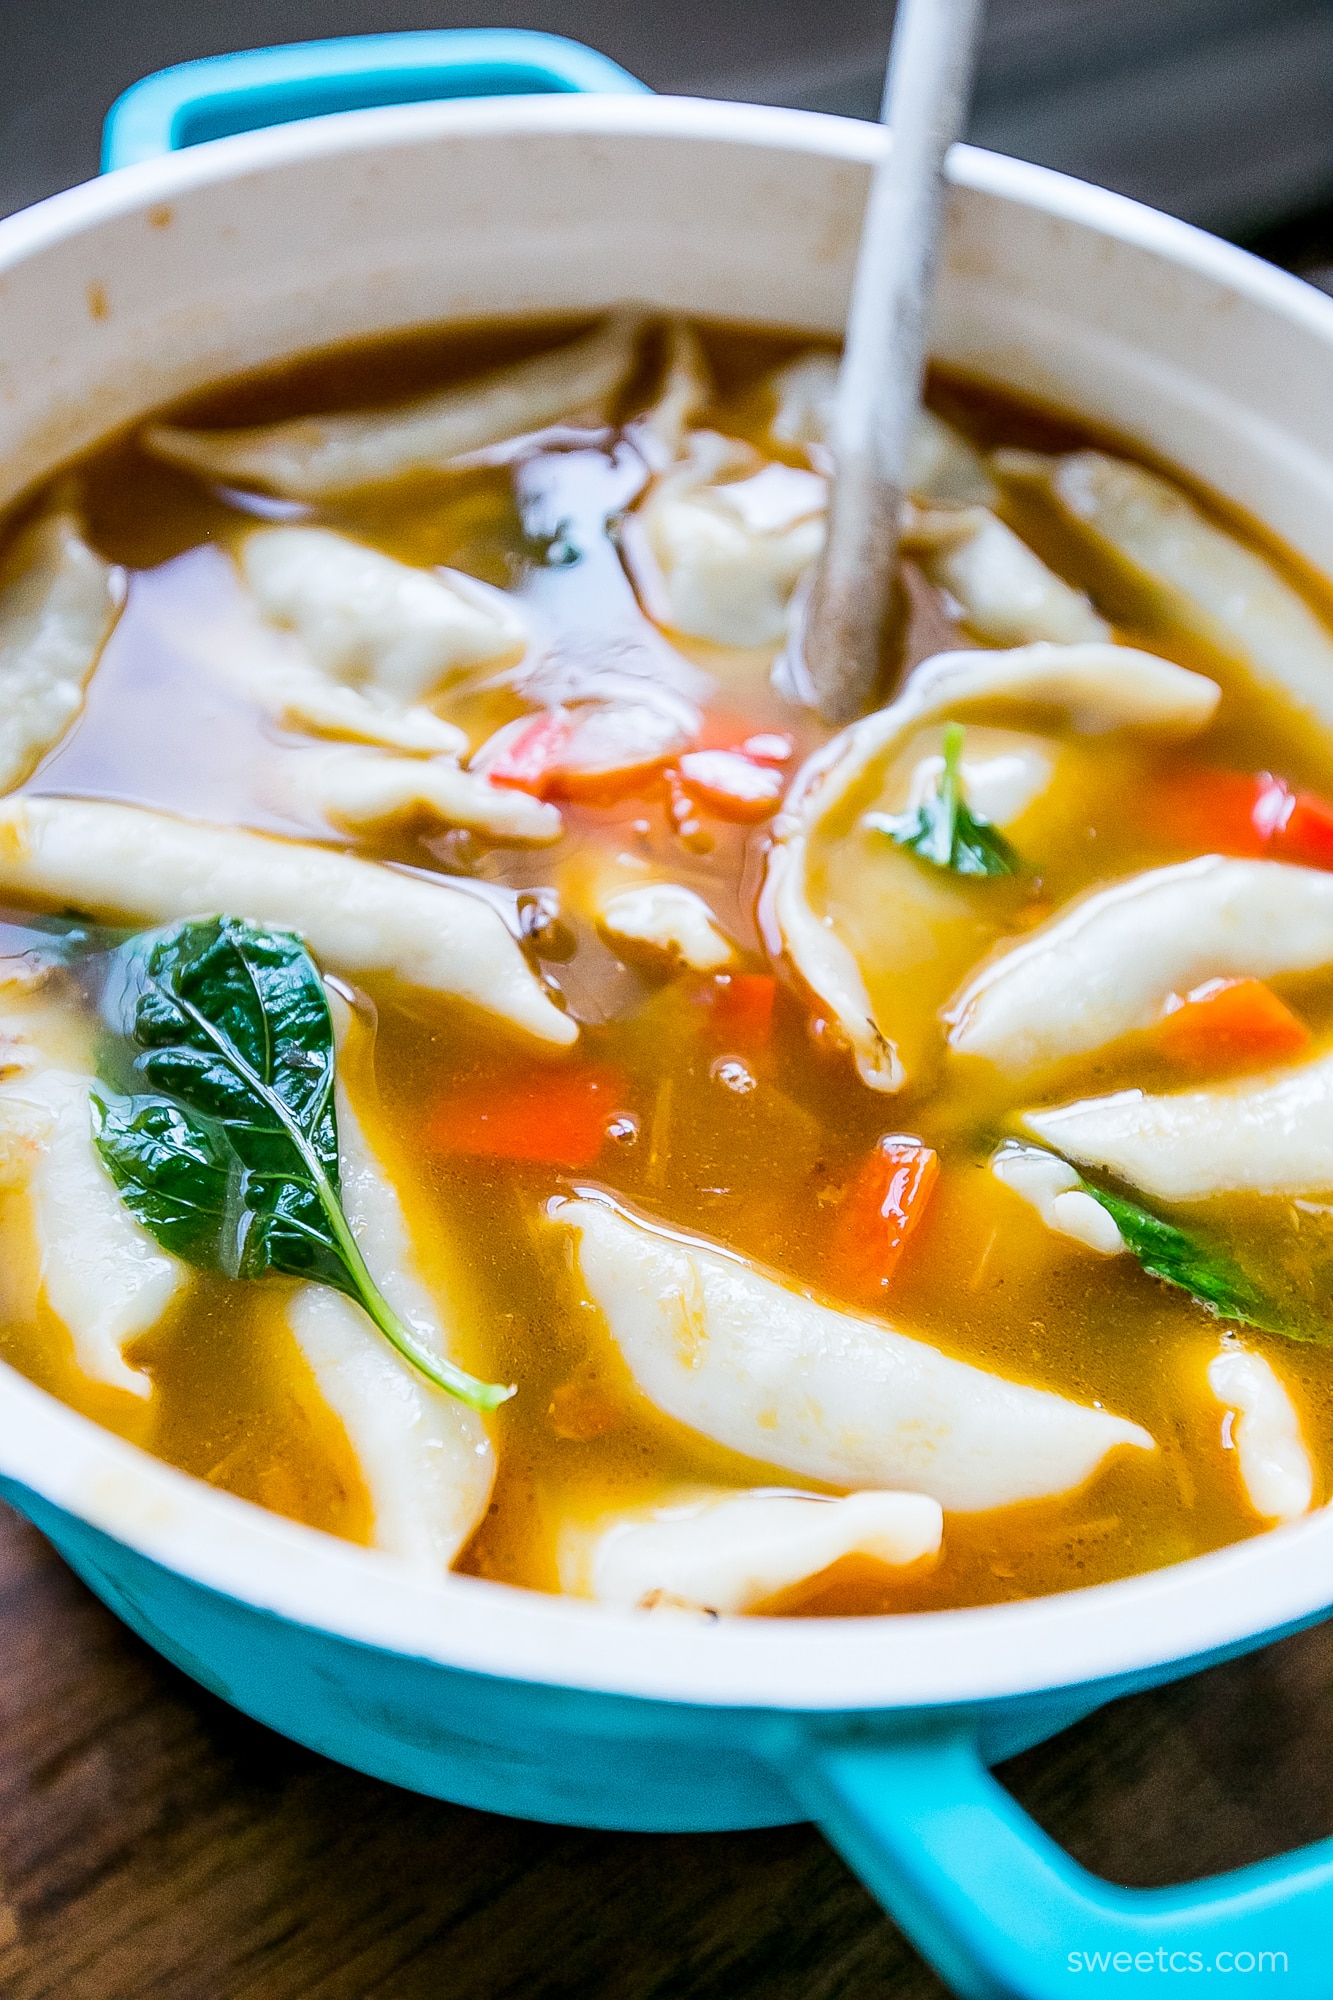 This soup looks so delicious- just 15 minutes for a tasty dumpling soup!